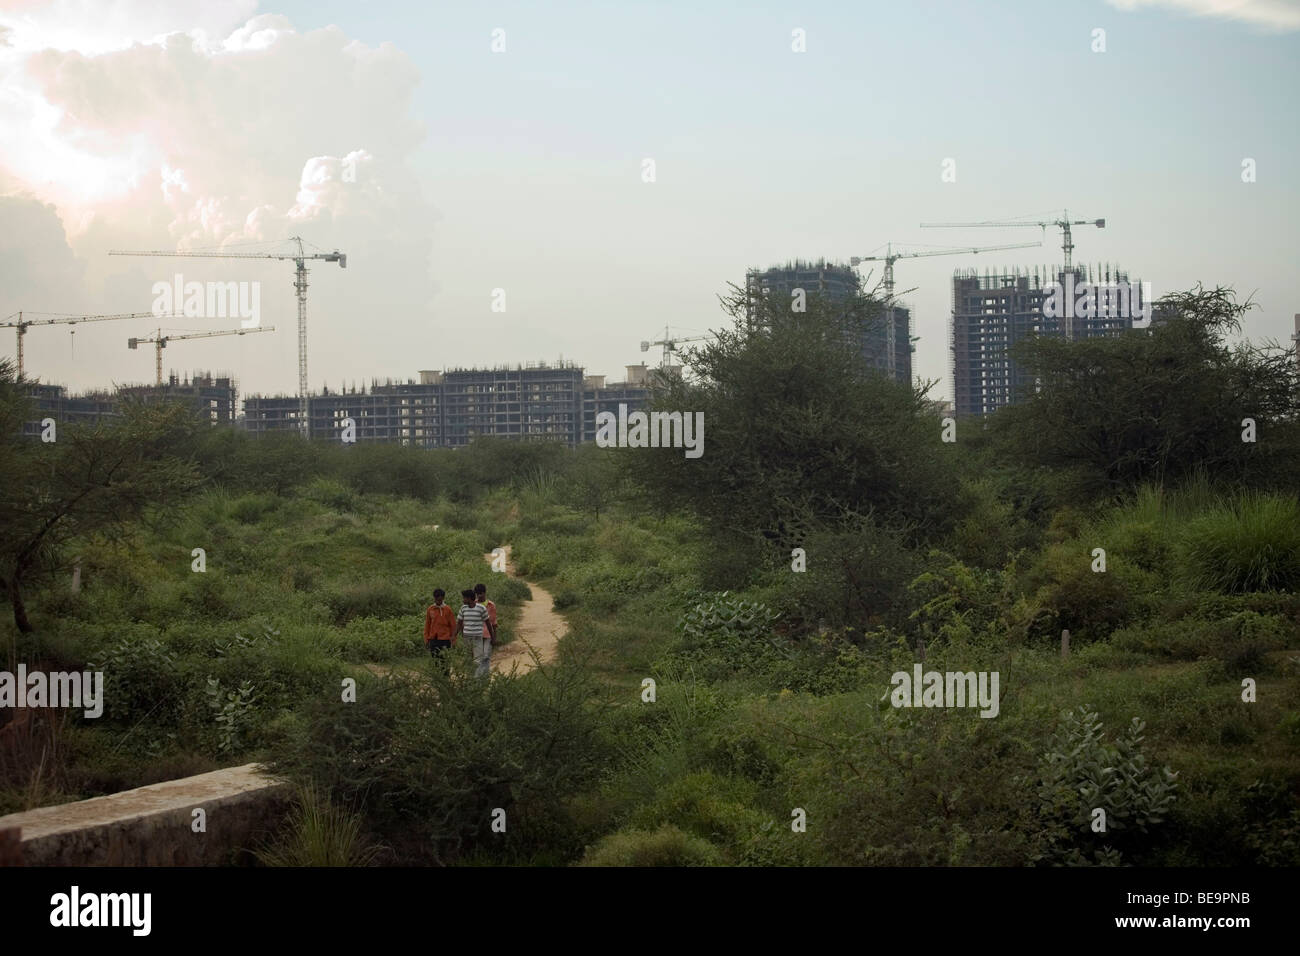 Workers returning from the building site of a new development in Gurgaon, India Stock Photo